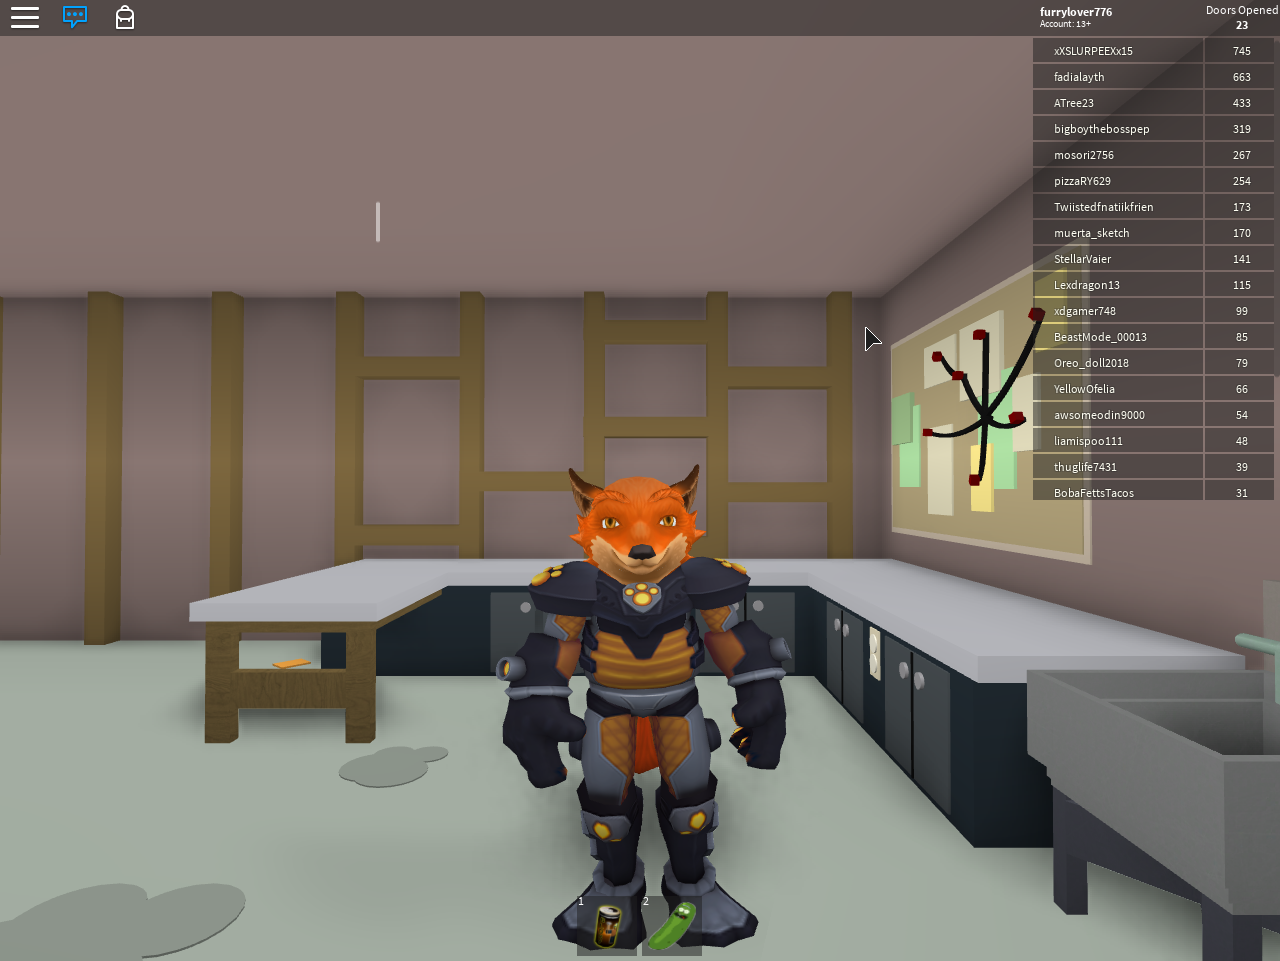 Furry In A Roblox Game By Furryfoxwolfxd Fur Affinity Dot Net - 115 roblox